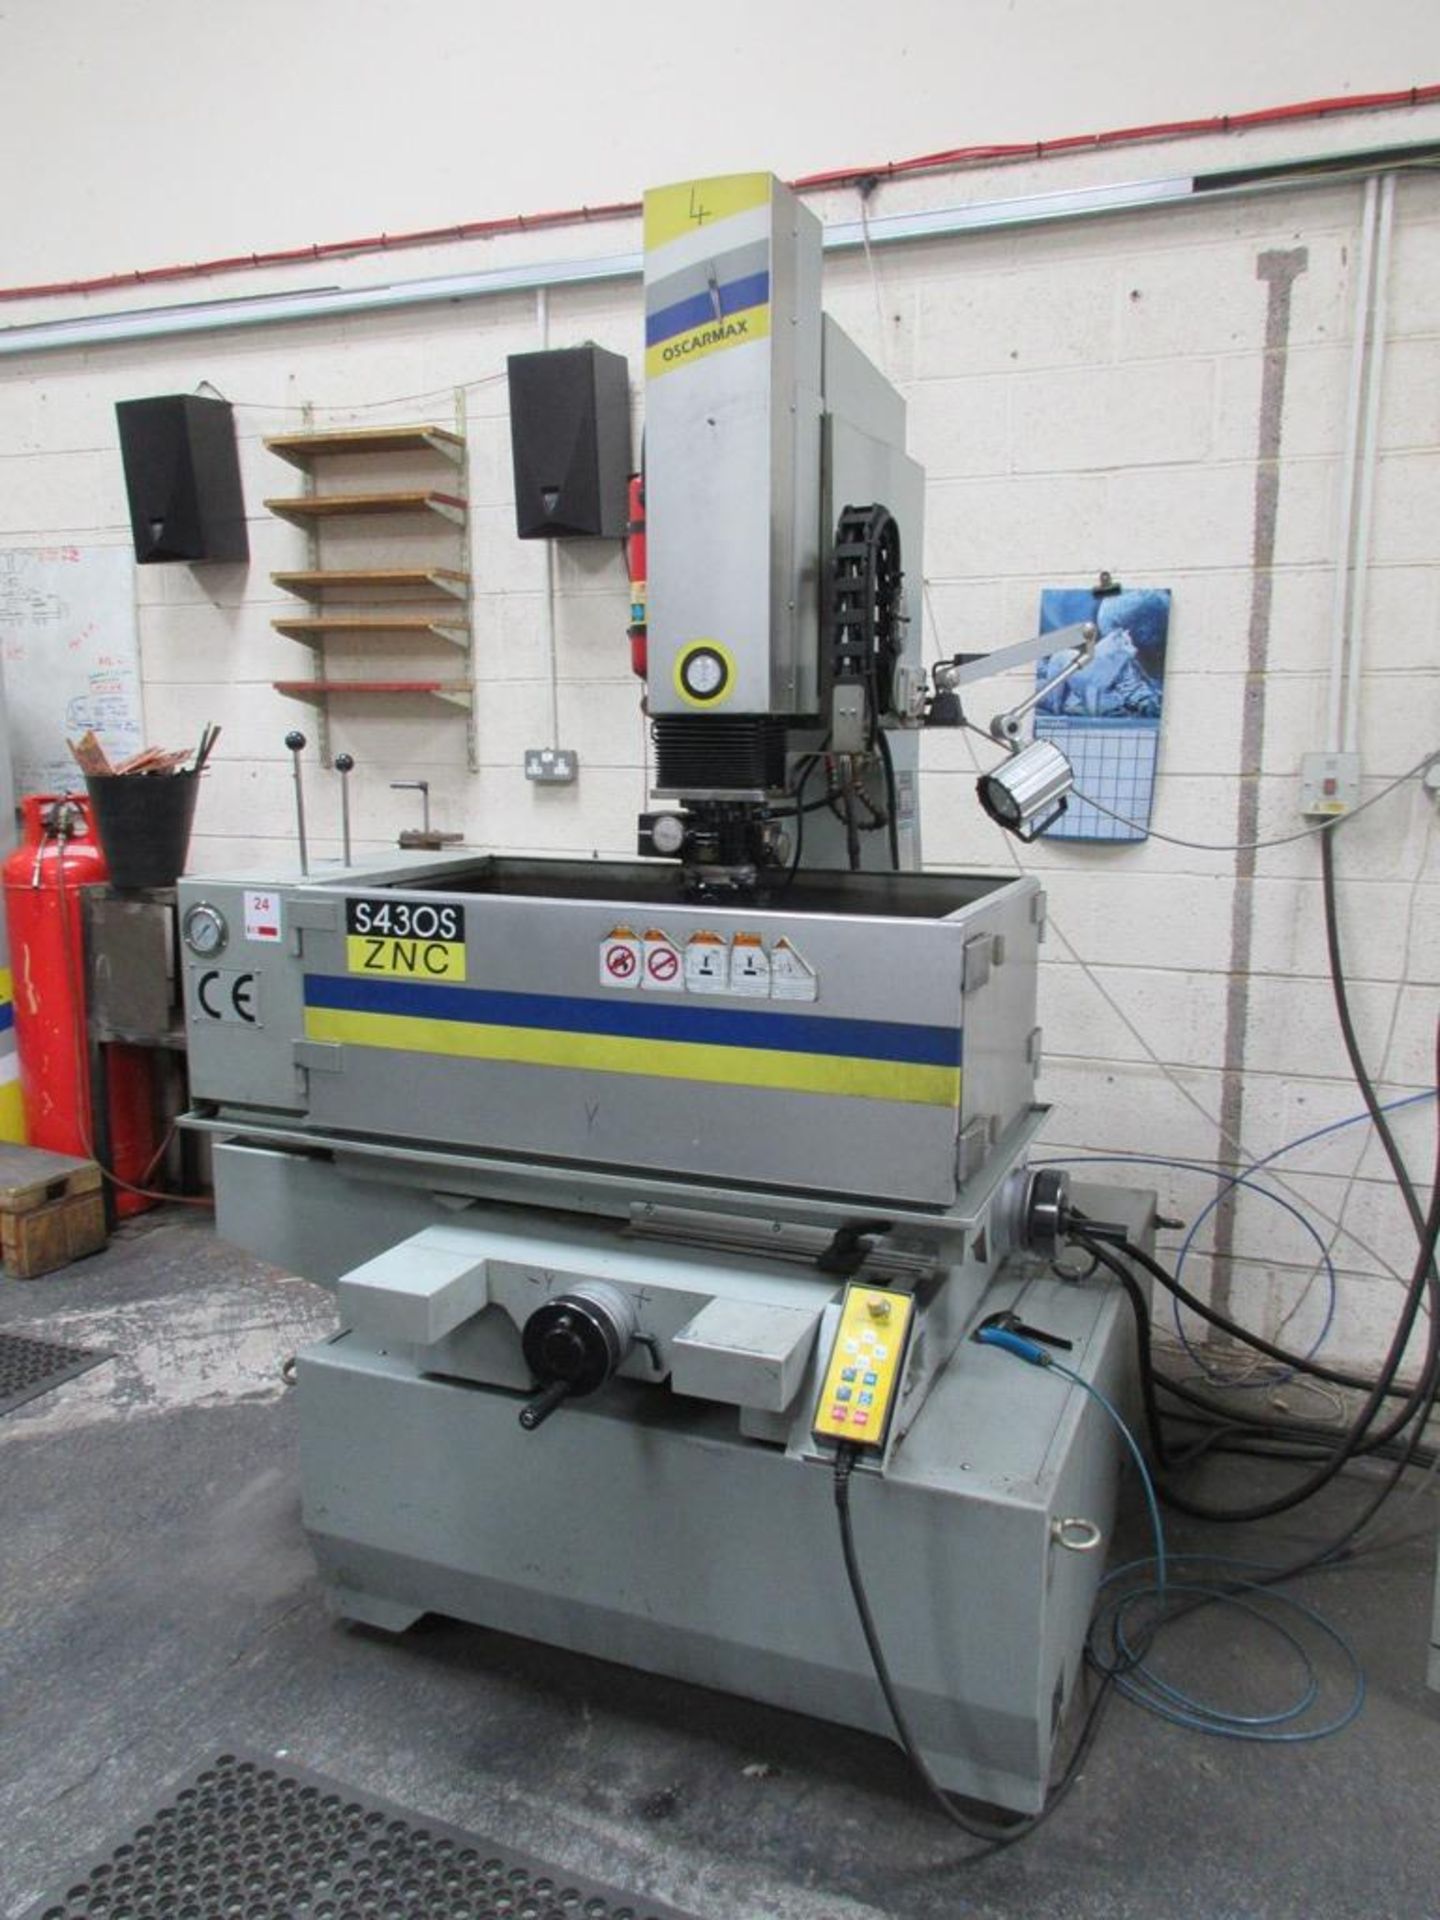 Oscarmax S430S ZNC 60A Electrical discharge machine (2016) - Image 2 of 10